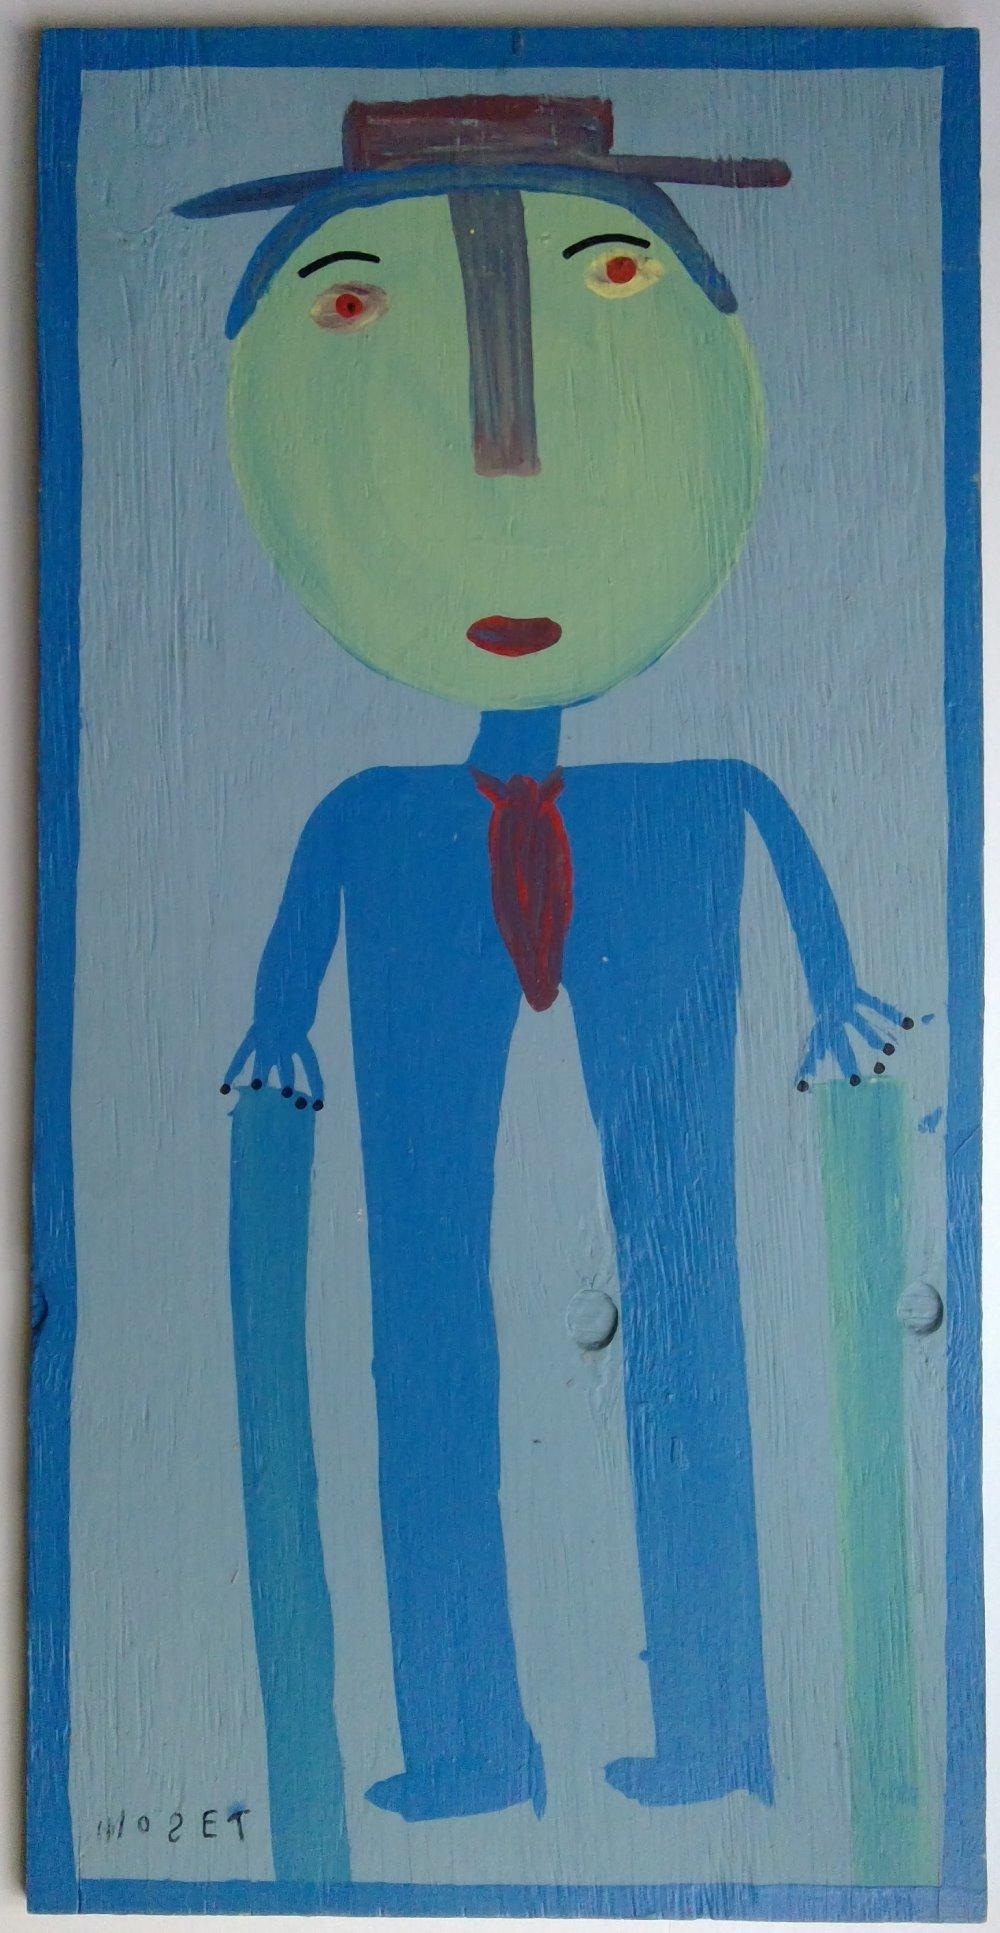 Self Portrait. 1993.   Latex house paint on plywood. 32 x 16 inches.  Signed 'Moset' lower left.  Exhibited: 